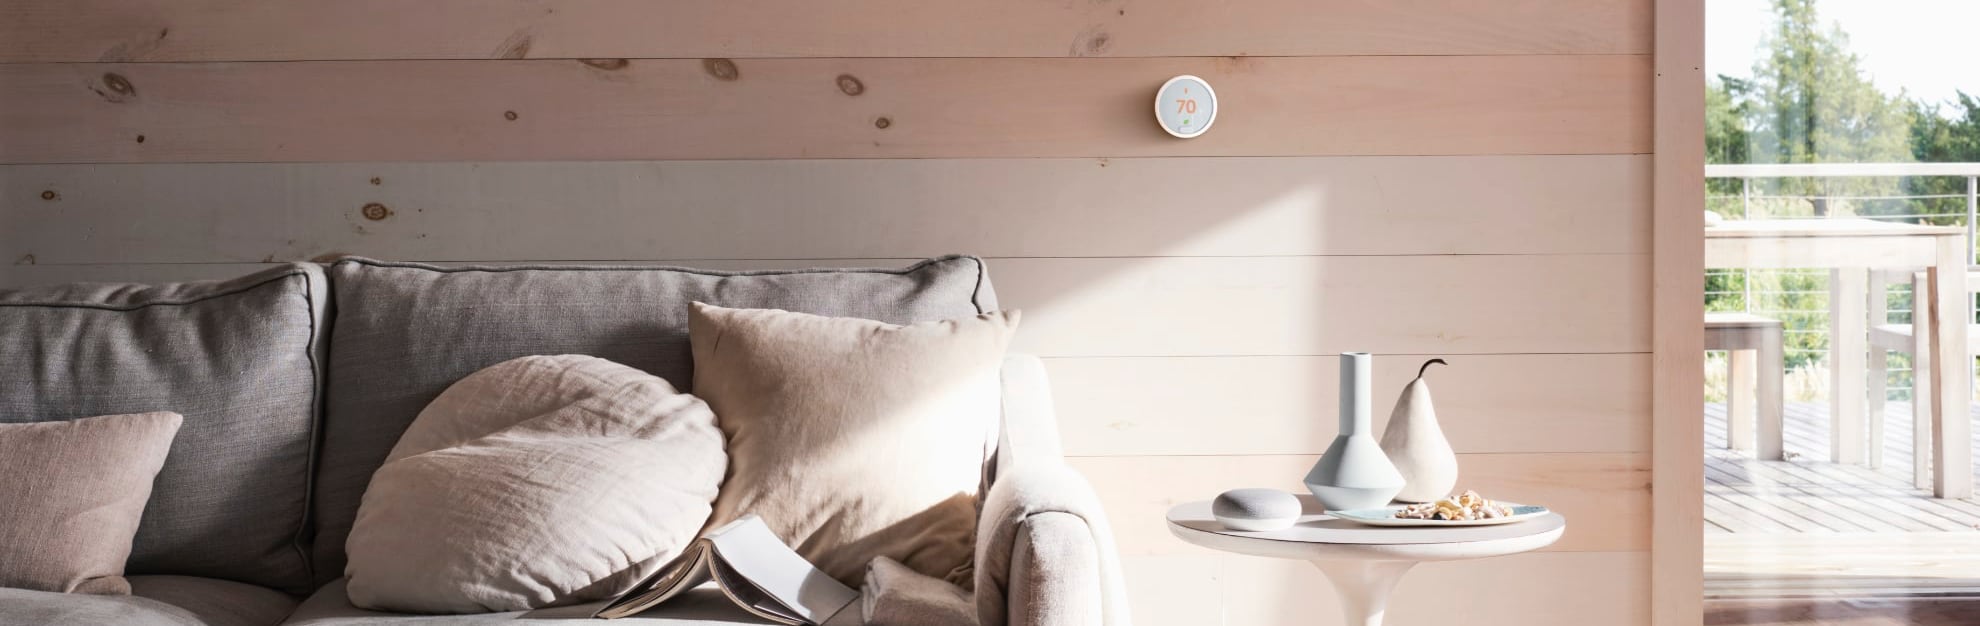 Vivint Home Automation in Raleigh